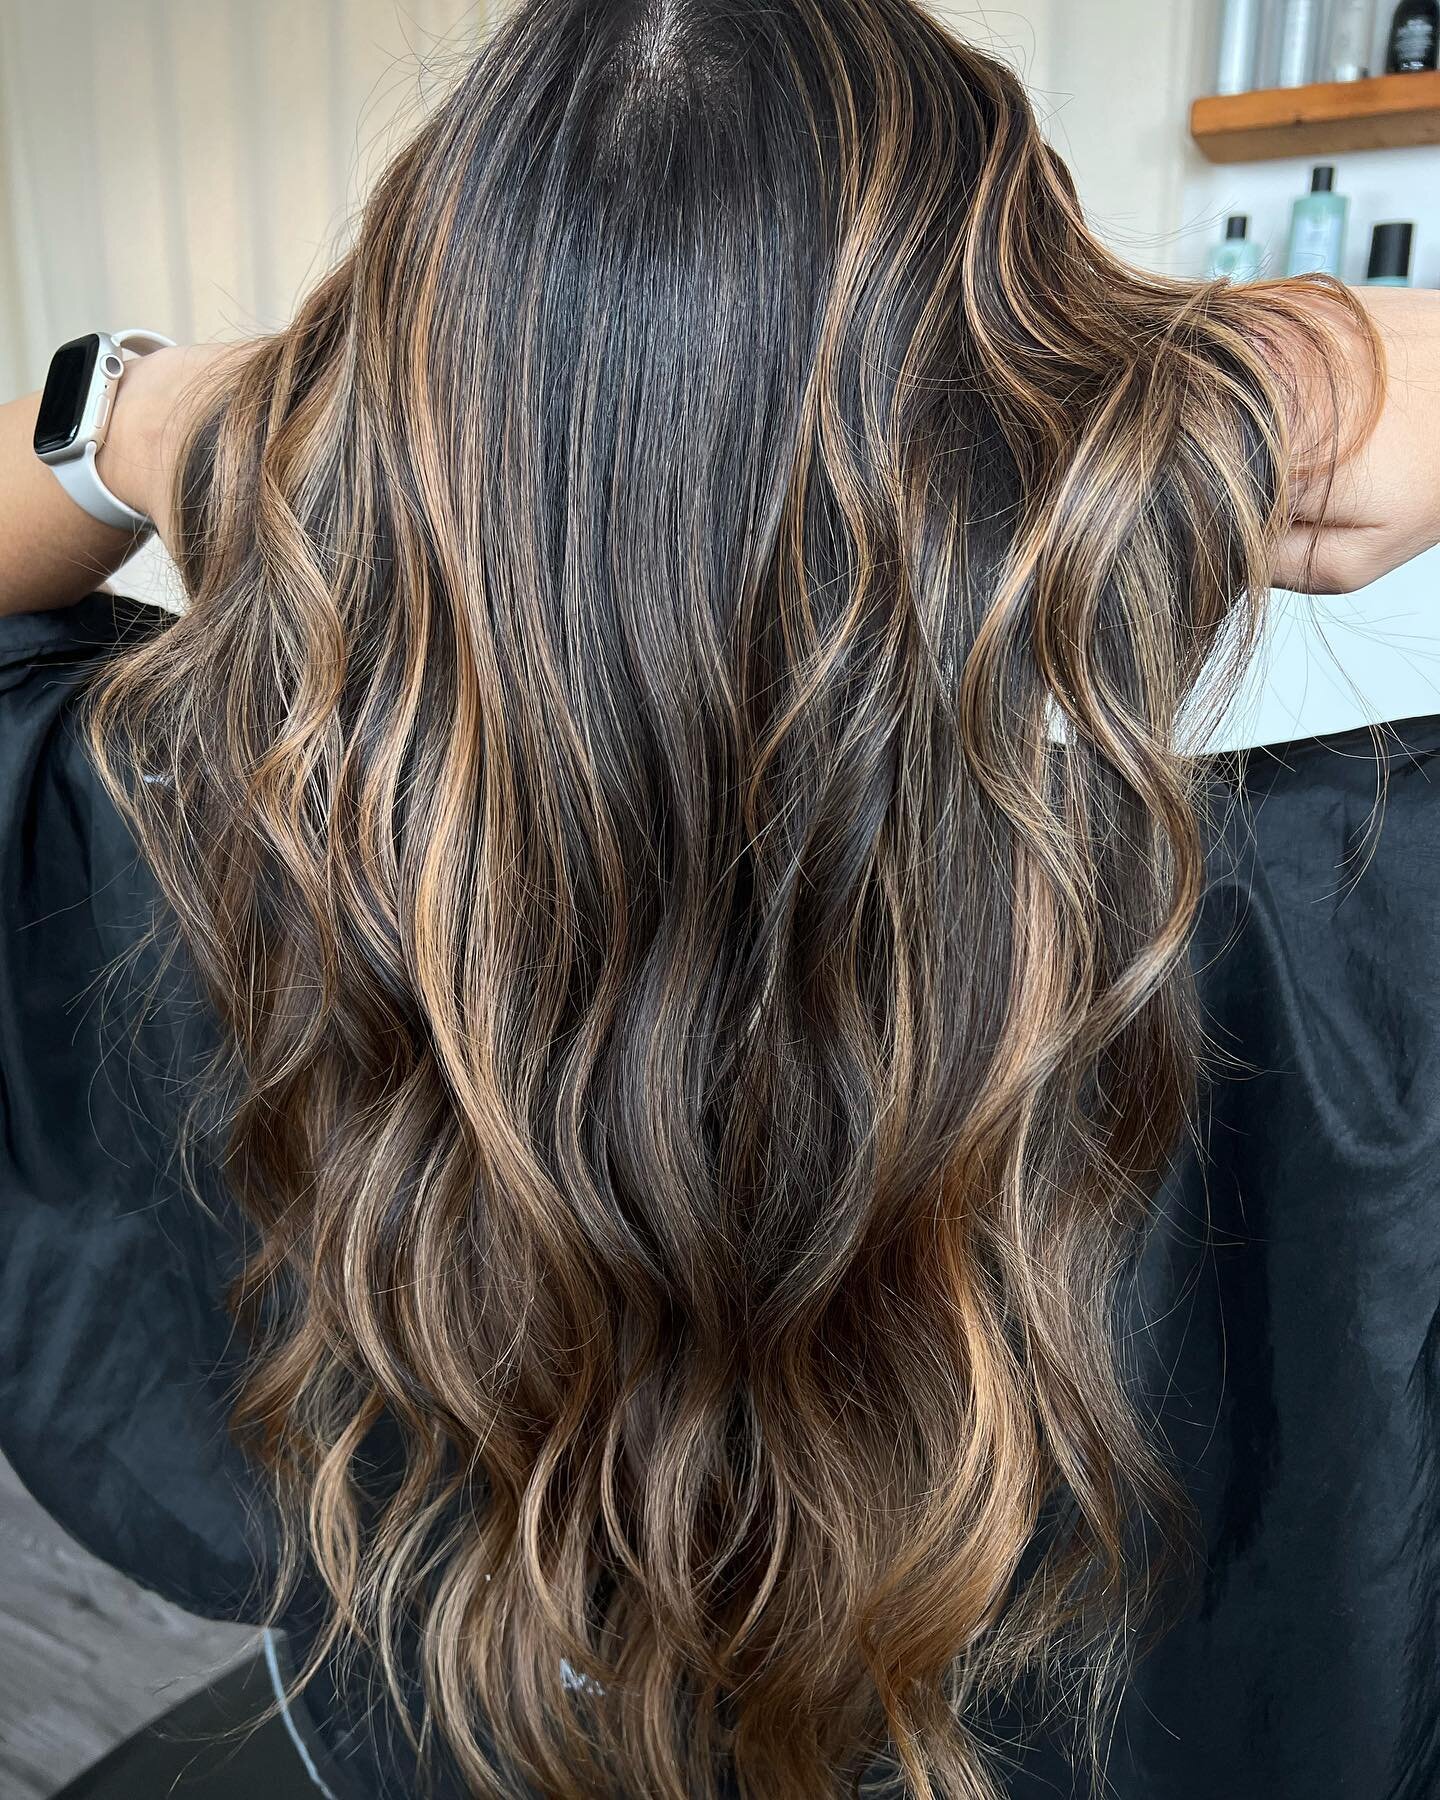 Top request last week:⬇️
&ldquo;Keep it bright but maybe more dimension&rdquo; meaning their ends are starting to look one color kinda like an ombr&eacute;. How do we fix this? By adding lowlights with the balayage. This will also make your lighter p